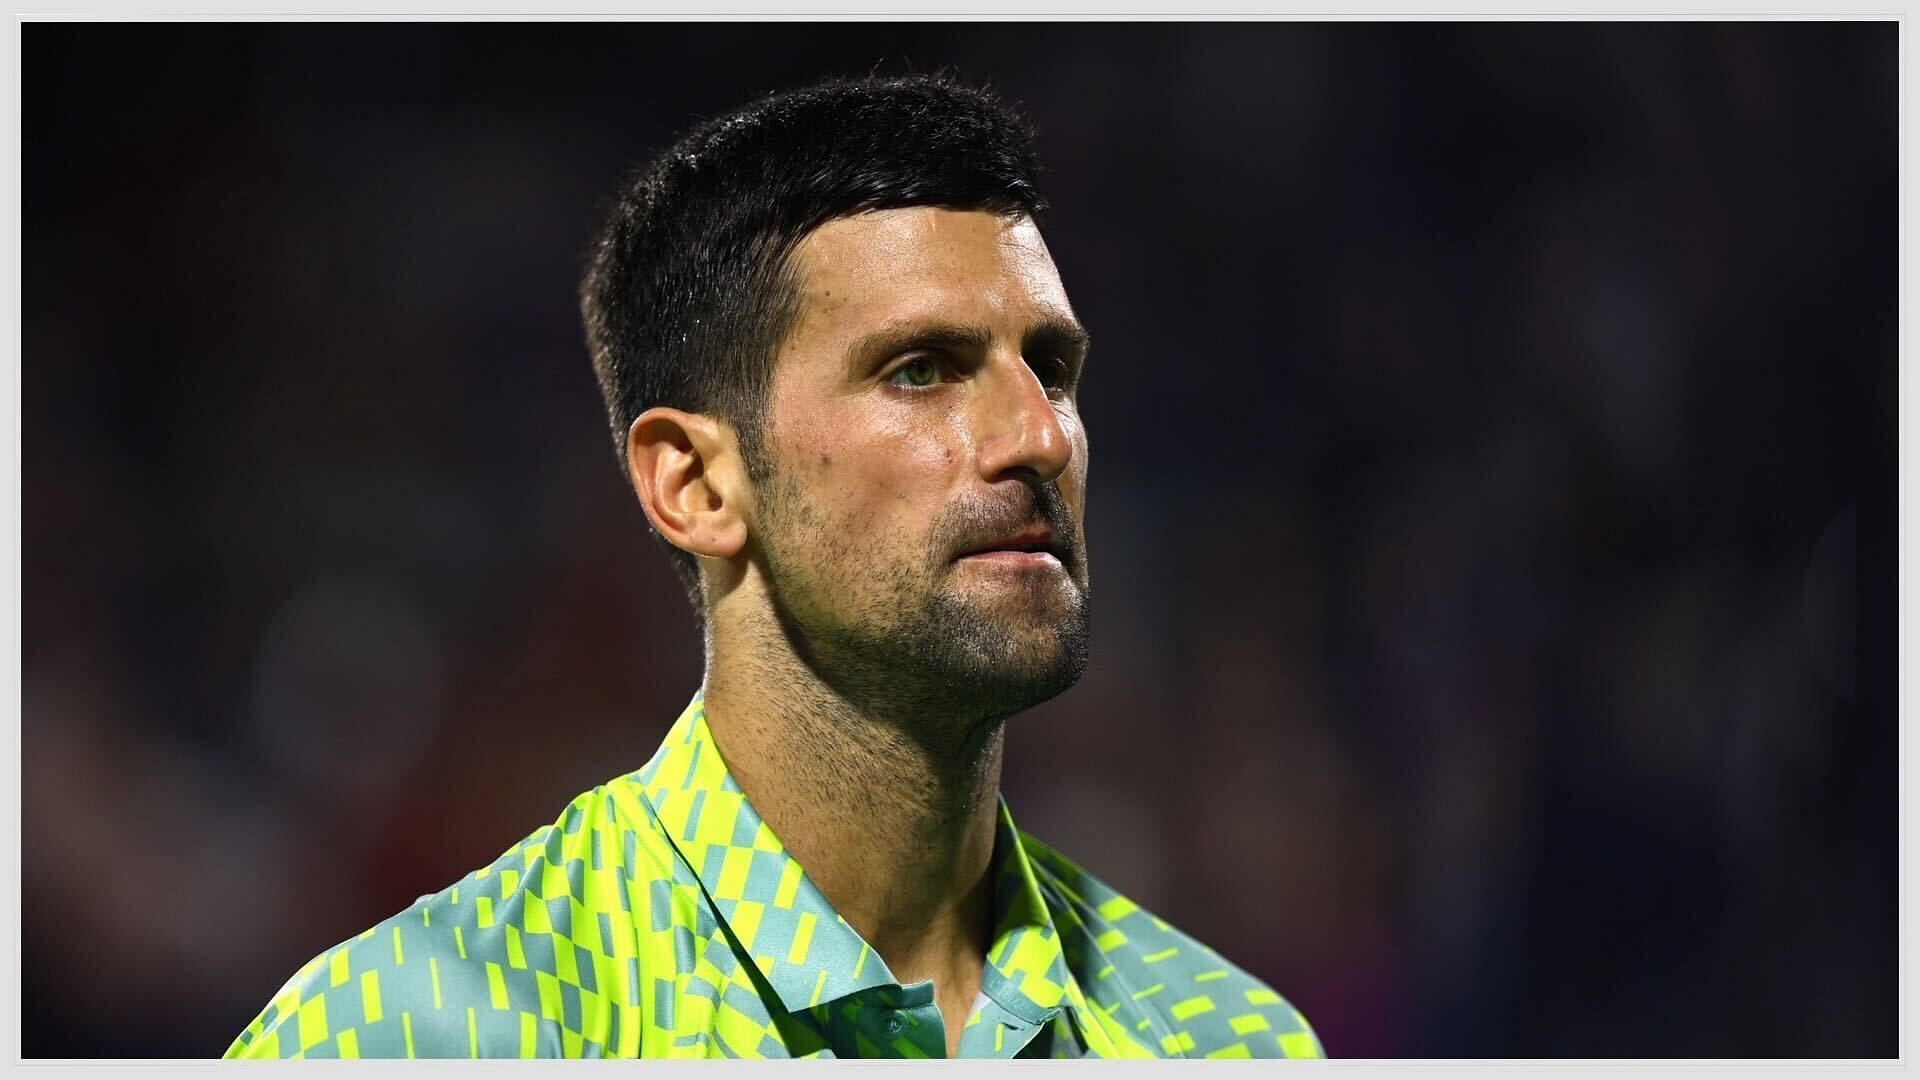 World No. 1 Novak Djokovic got medical treatment during his United Cup opener on Tuesday.